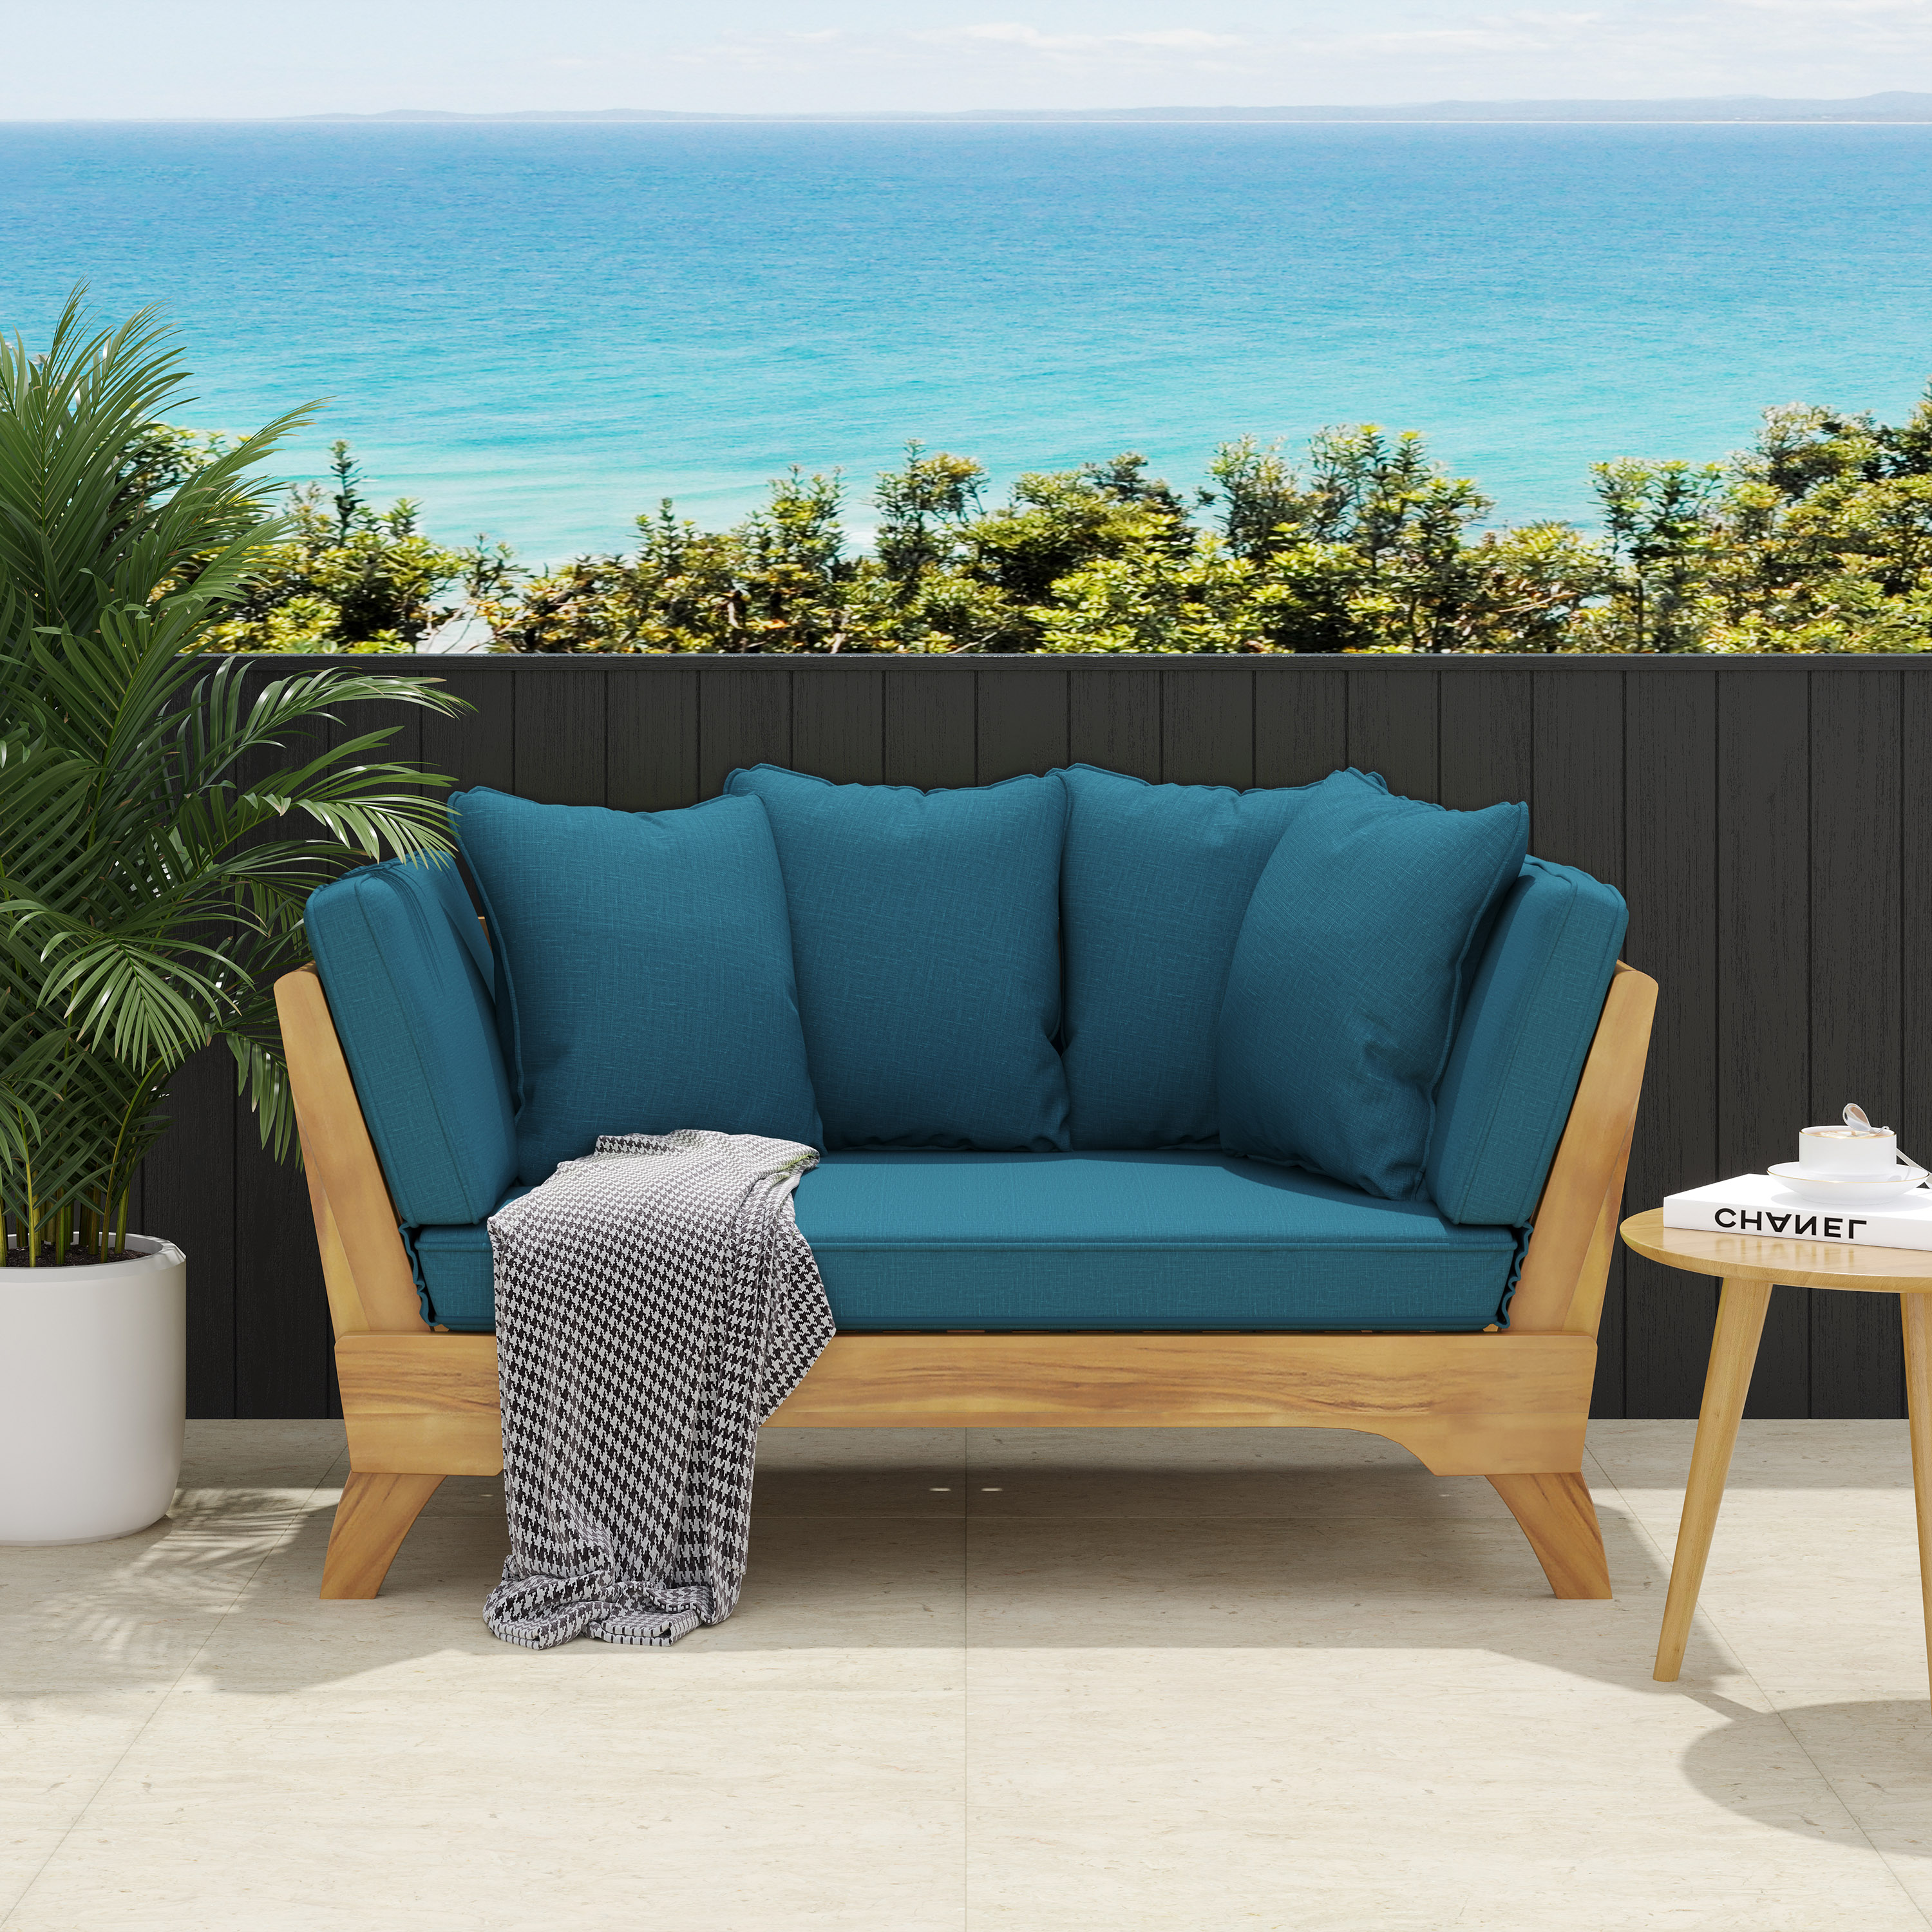 Finleigh Acacia Wood Outdoor Expandable Daybed with Cushions, Teak, Dark Teal, and Khaki - image 1 of 8